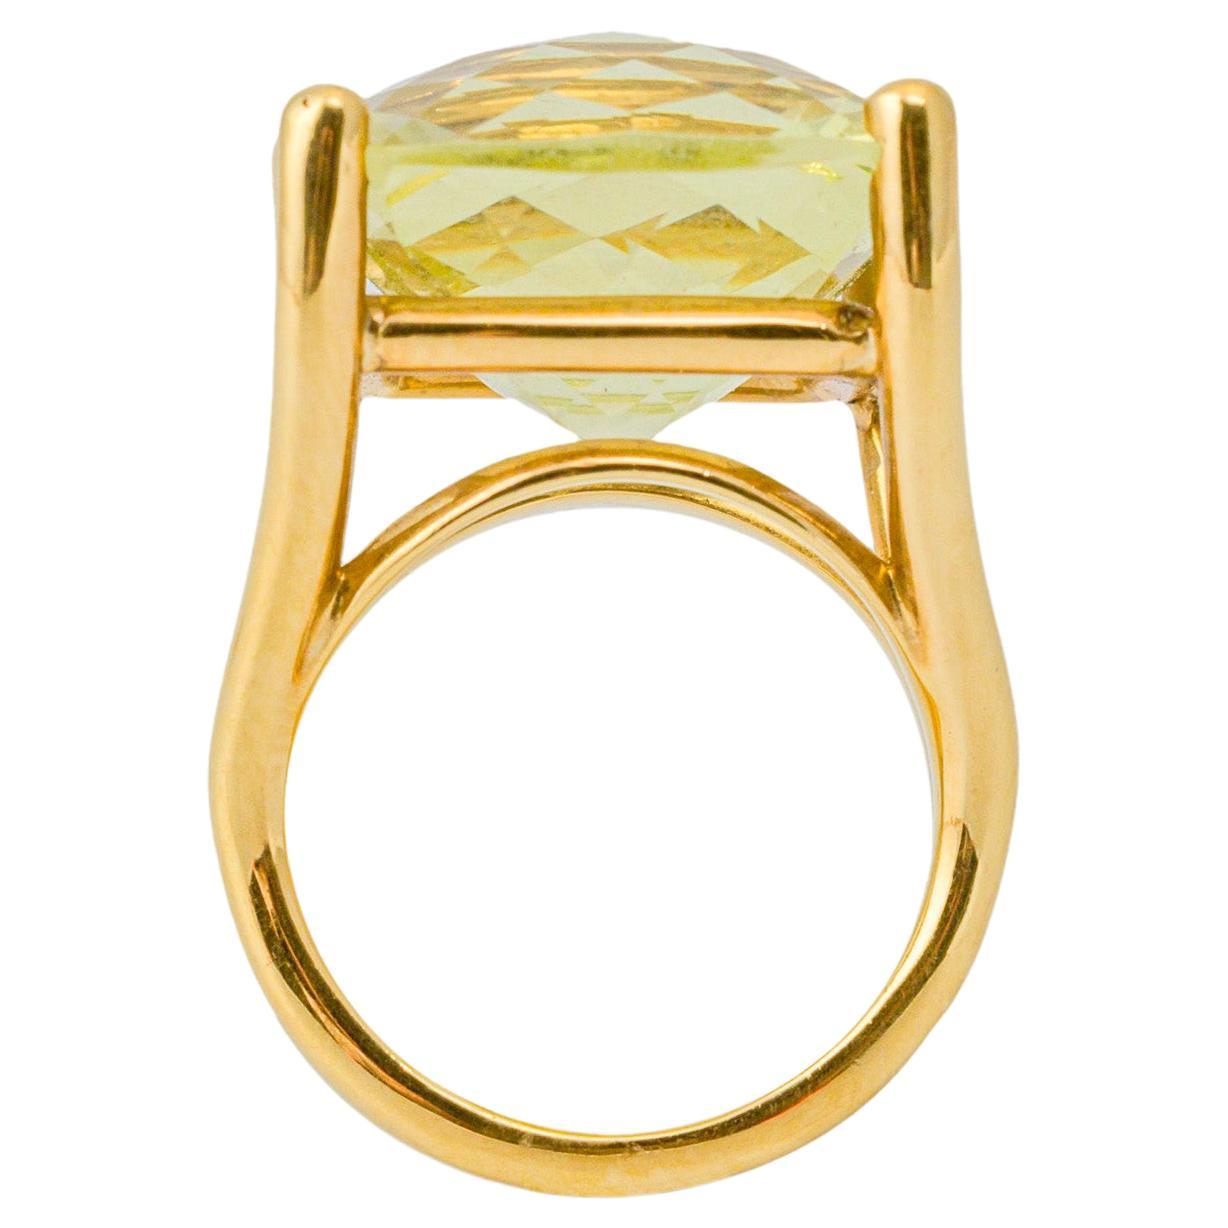 "Costis" Stone on Wire Ring with 21.68 carats Cushion-cut Lemon Quartz For Sale